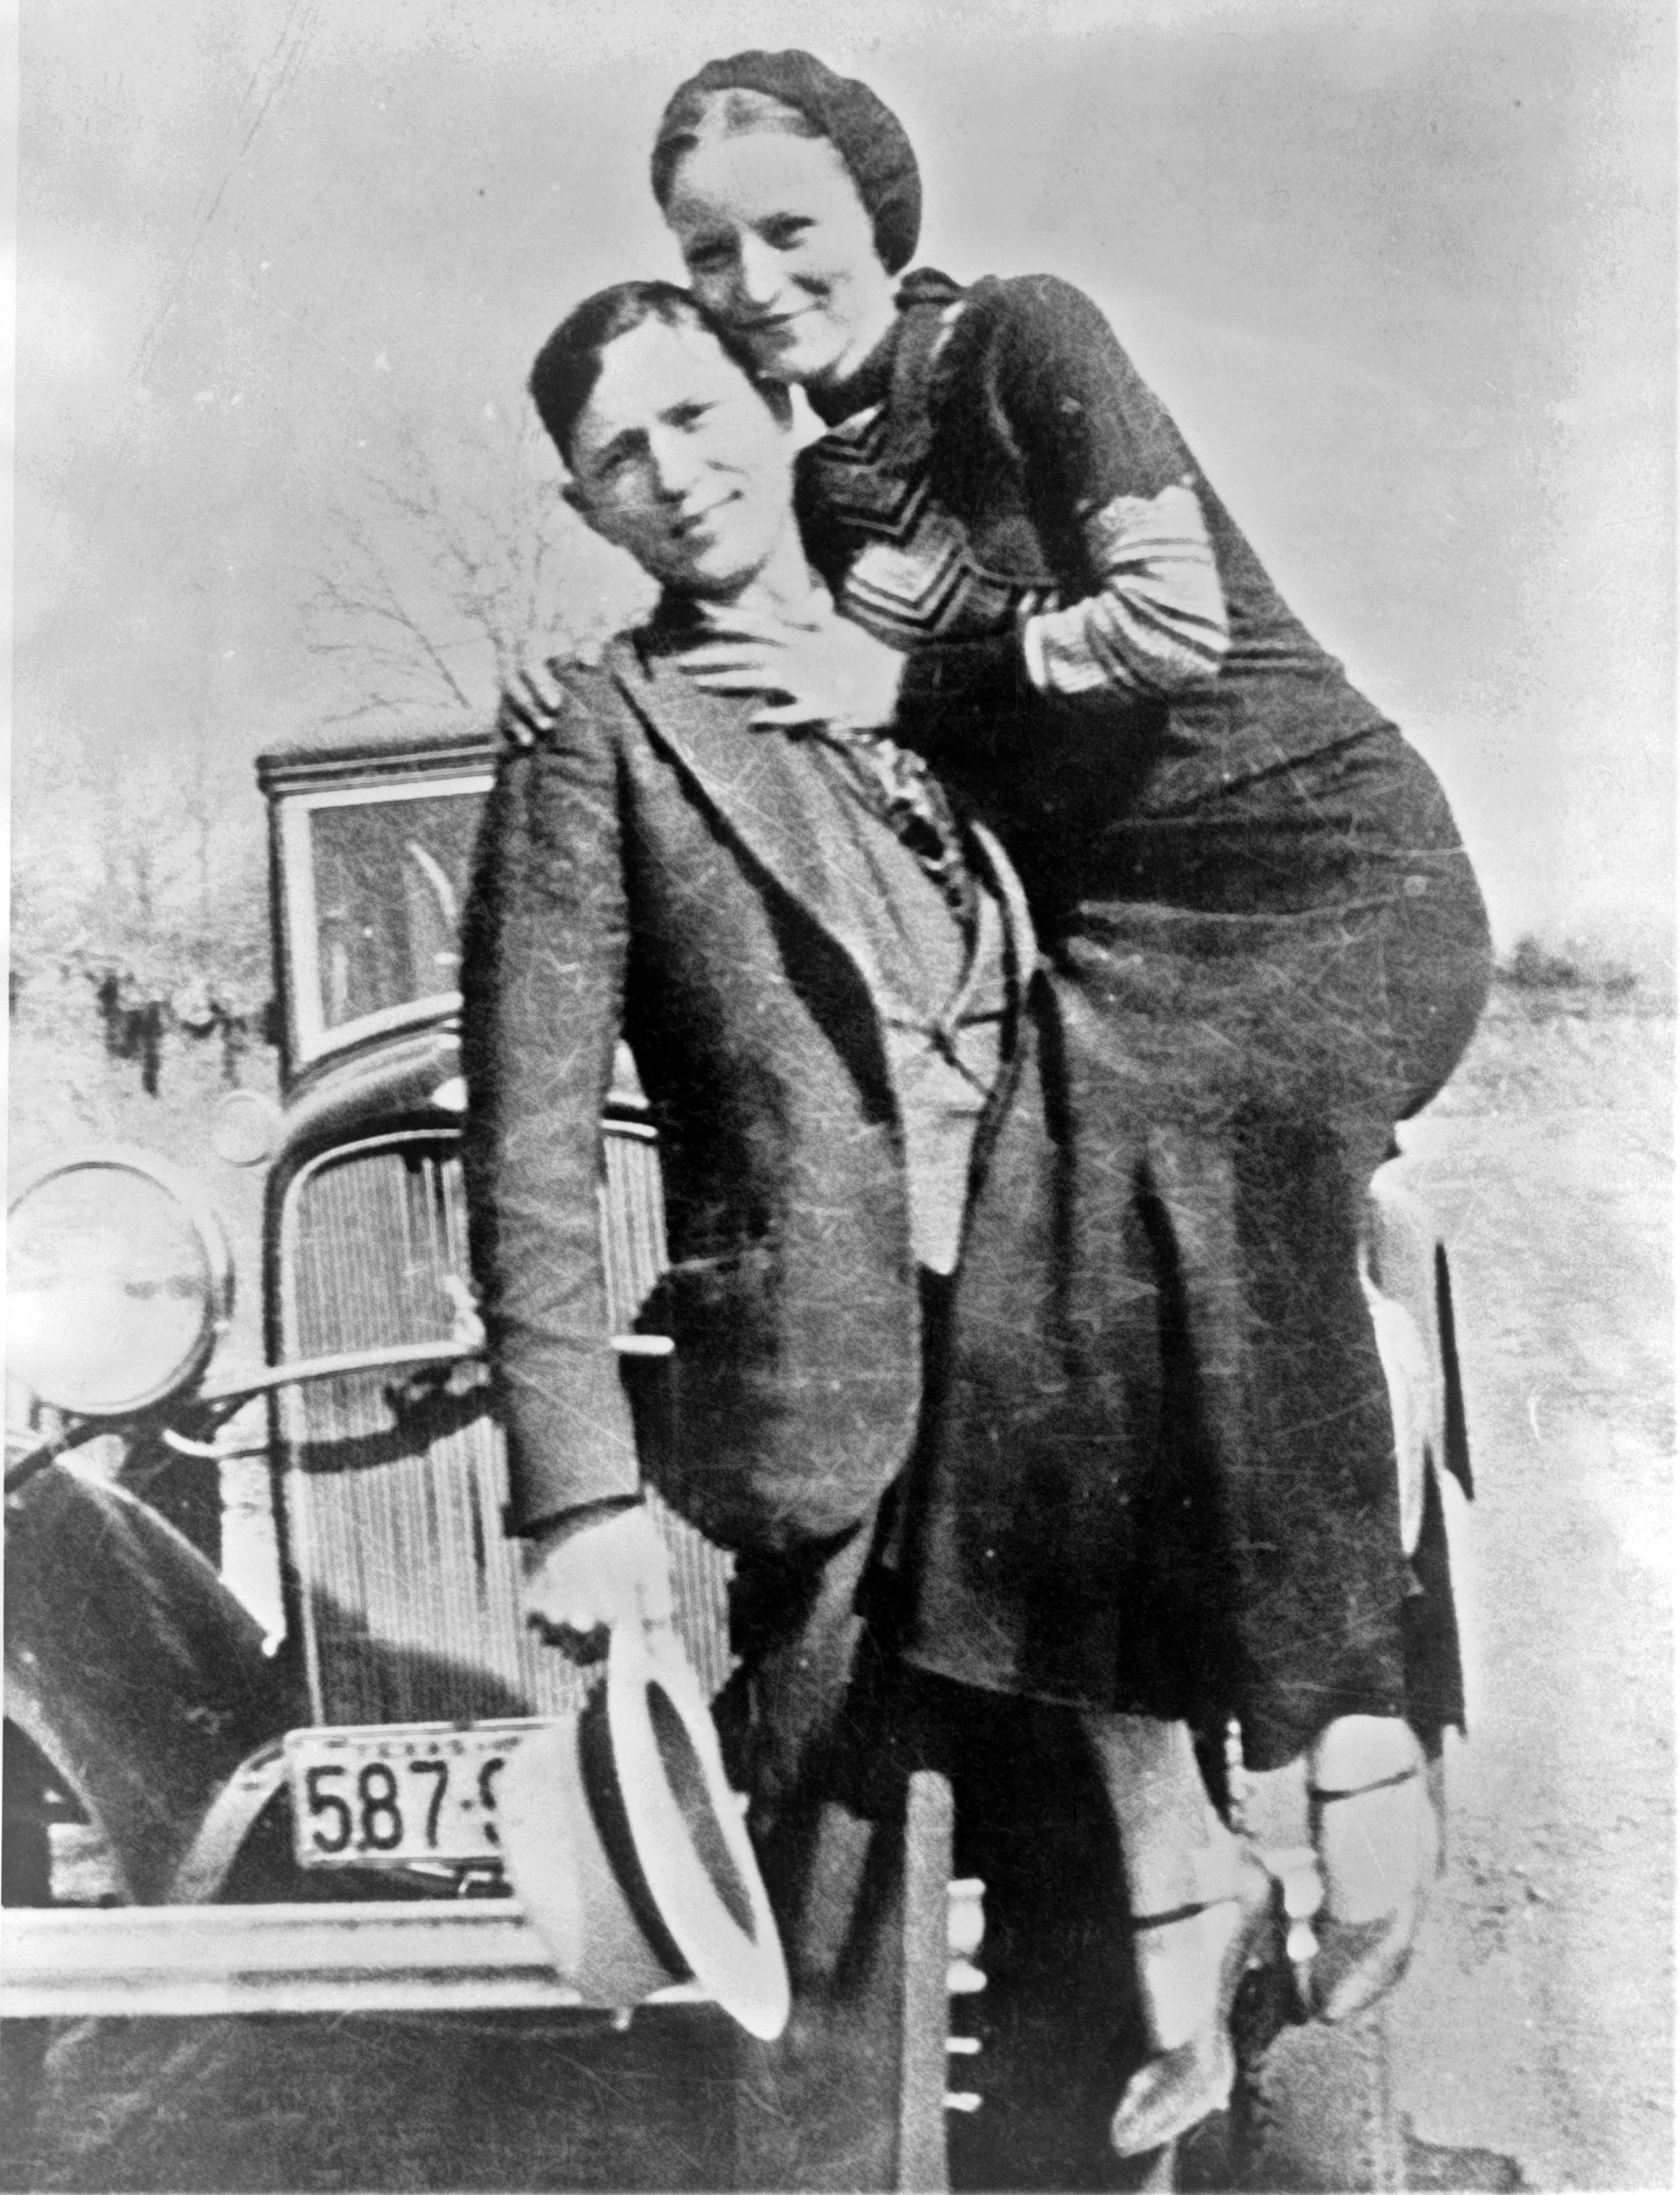 Bonnie and Clyde in 1933 - Wikimedia